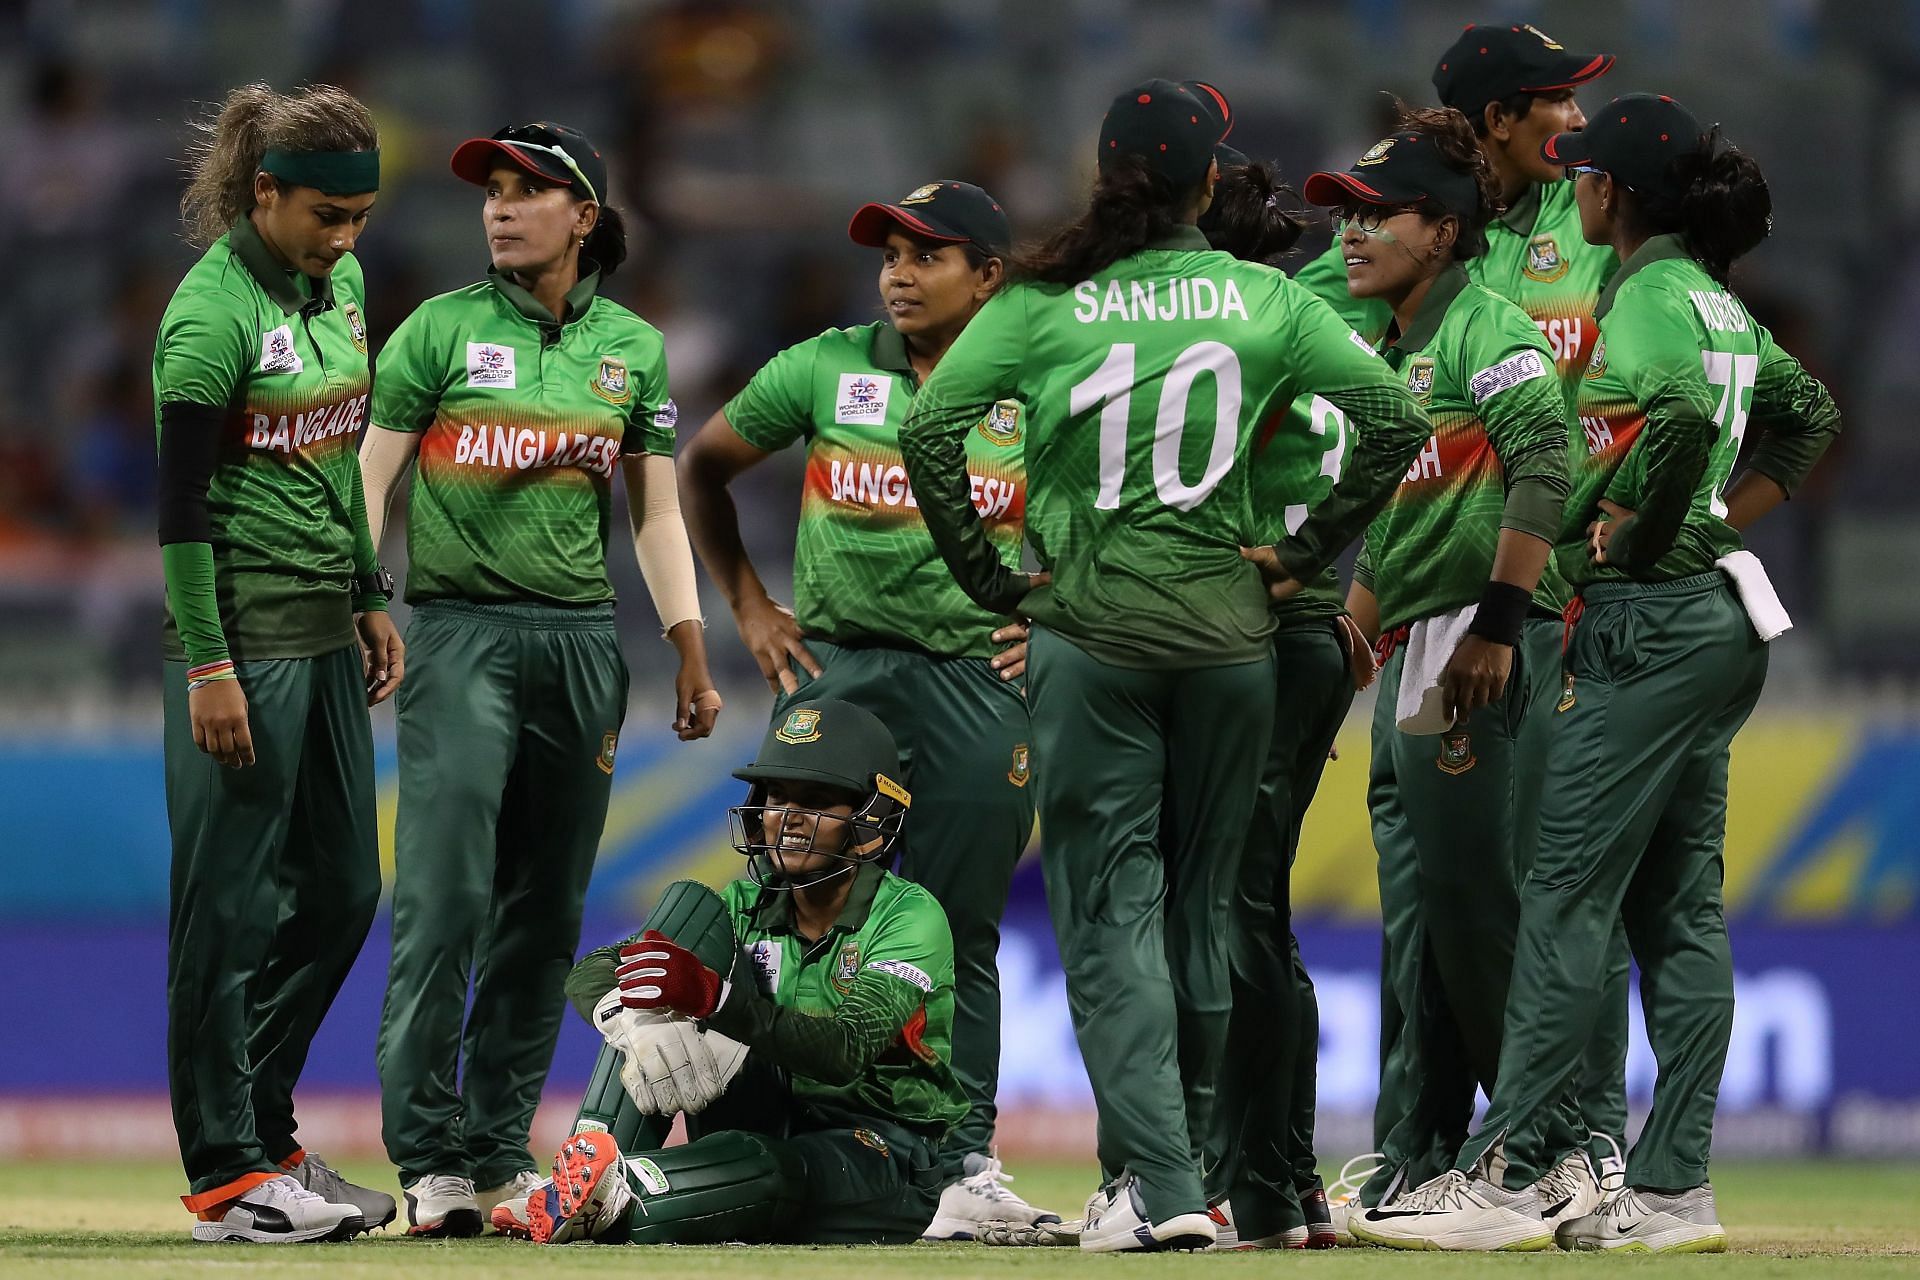 Women's World Cup Qualifier 2021, Warm-Up Match 1: Bangladesh Women vs Sri Lanka Women Probable XIs, pitch report, weather forecast, match prediction and live streaming details